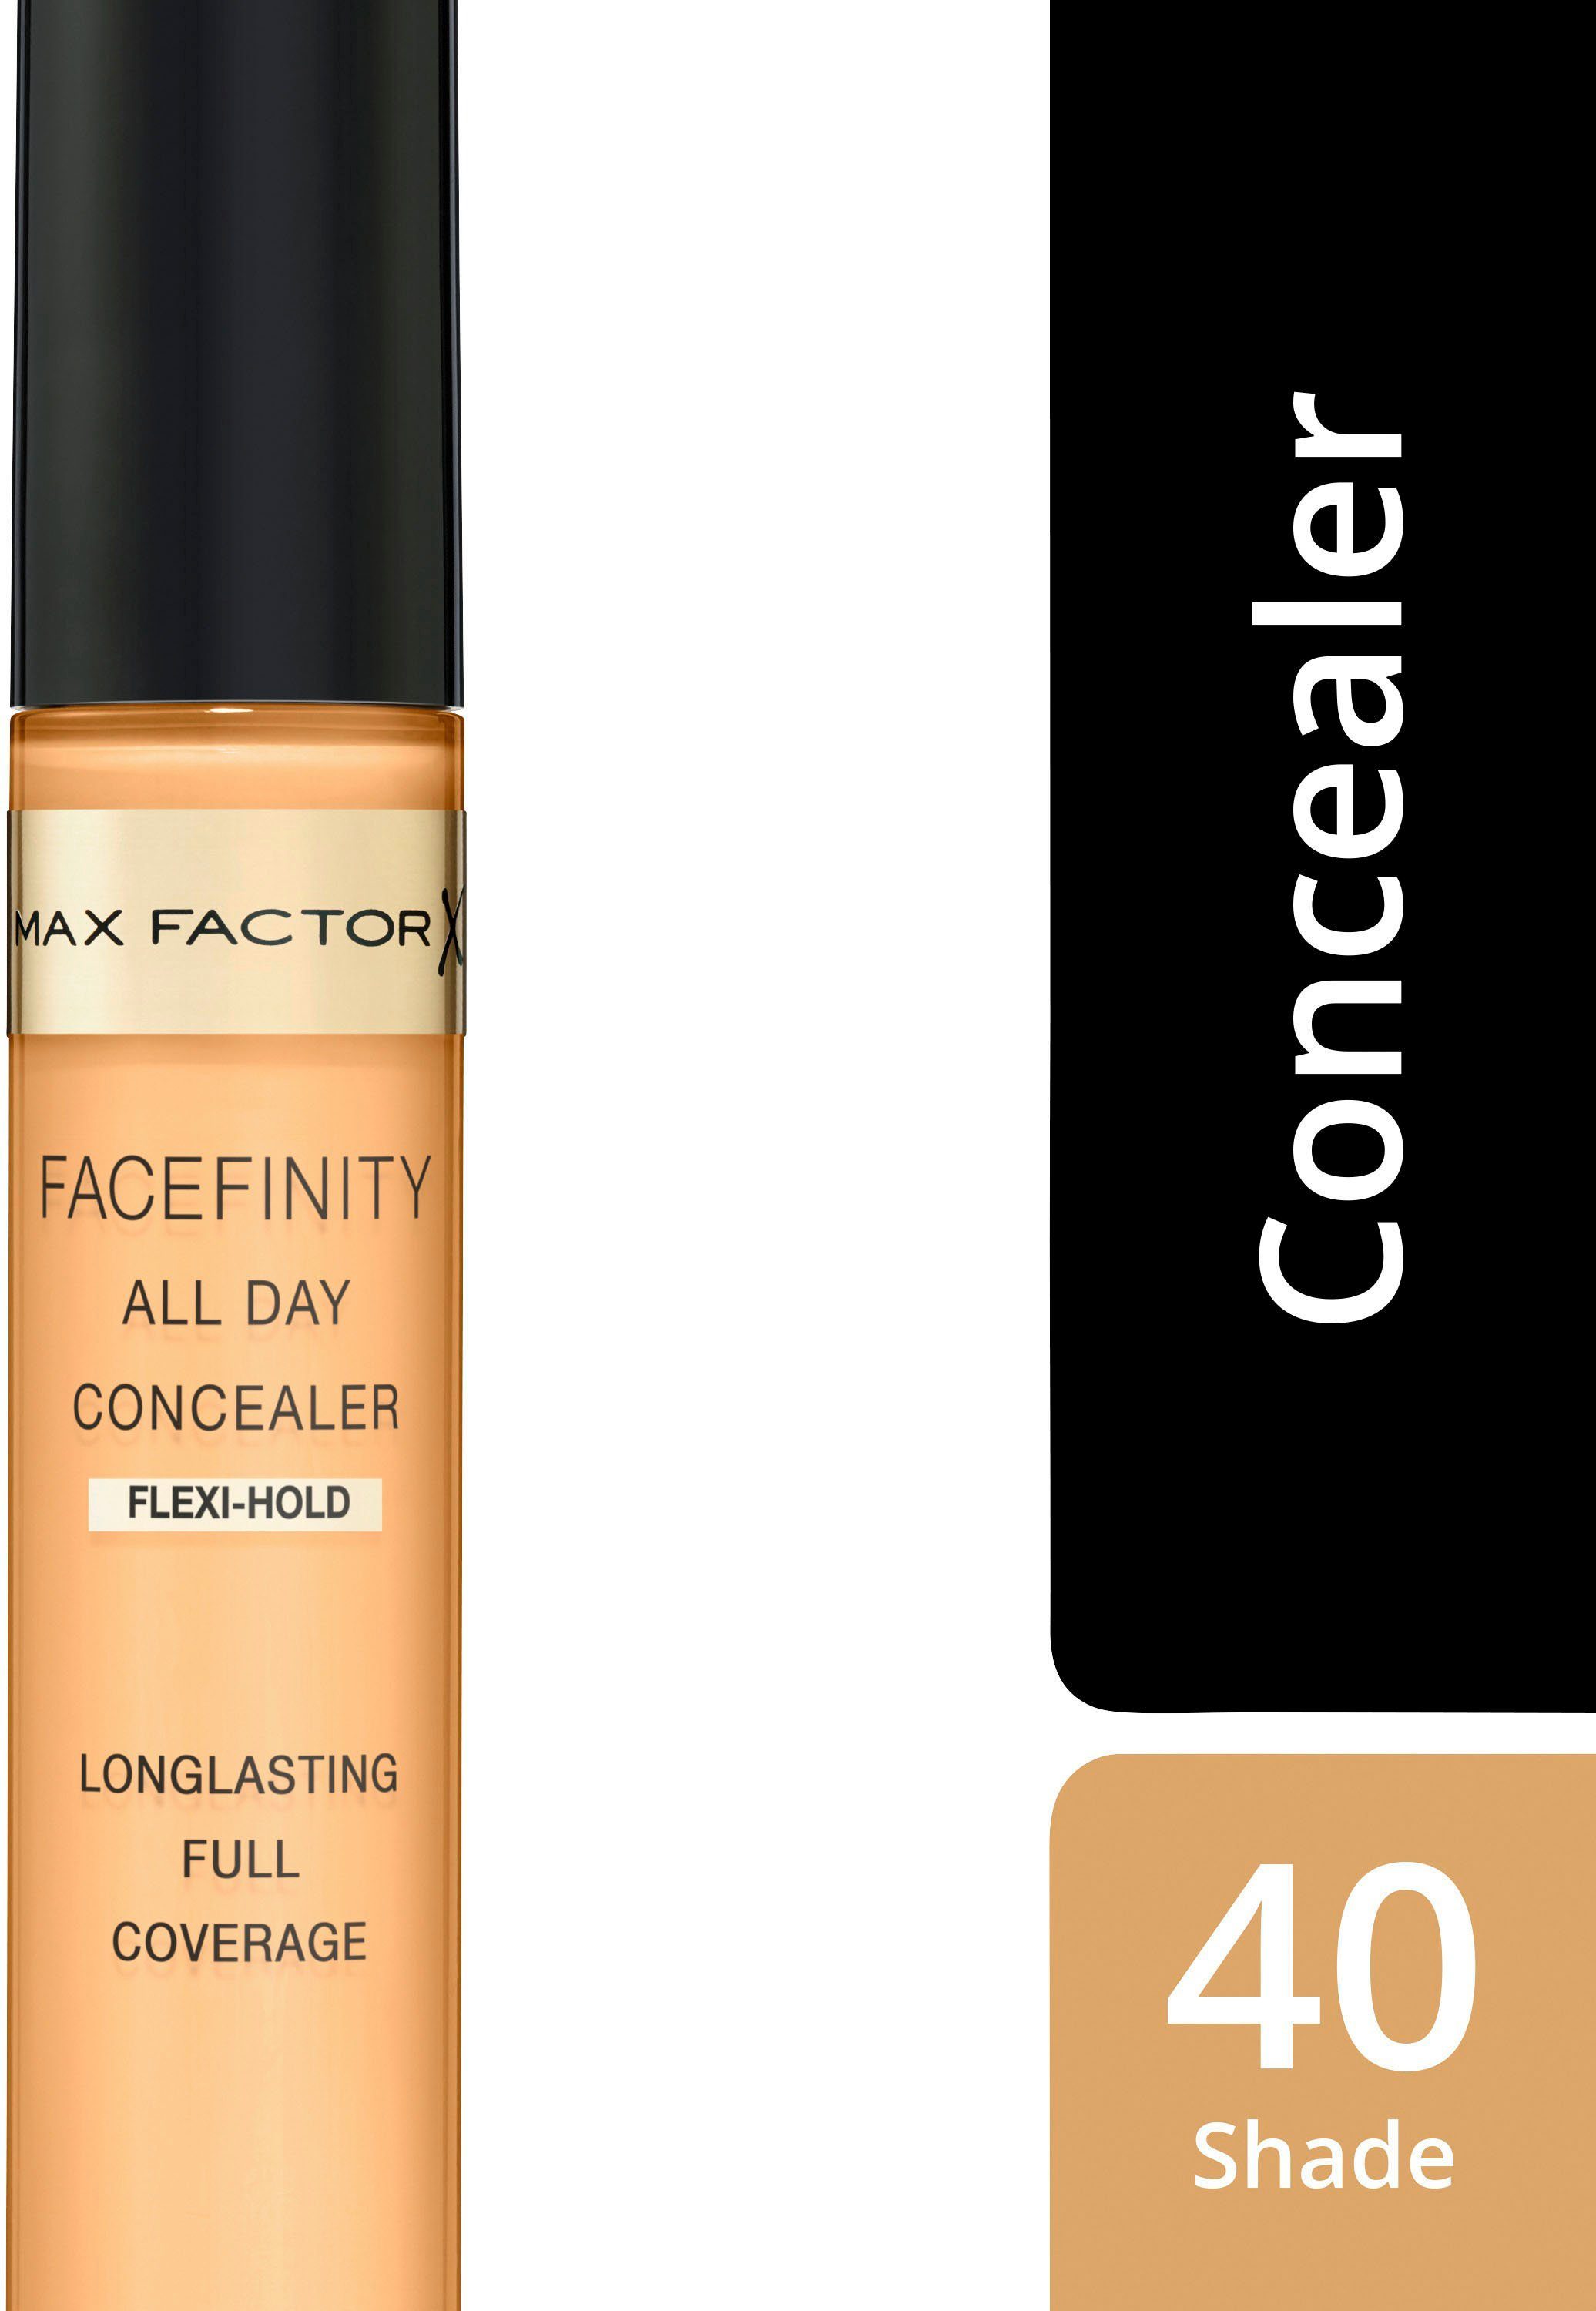 MAX FACTOR Concealer FACEFINITY Flawless All Day 40